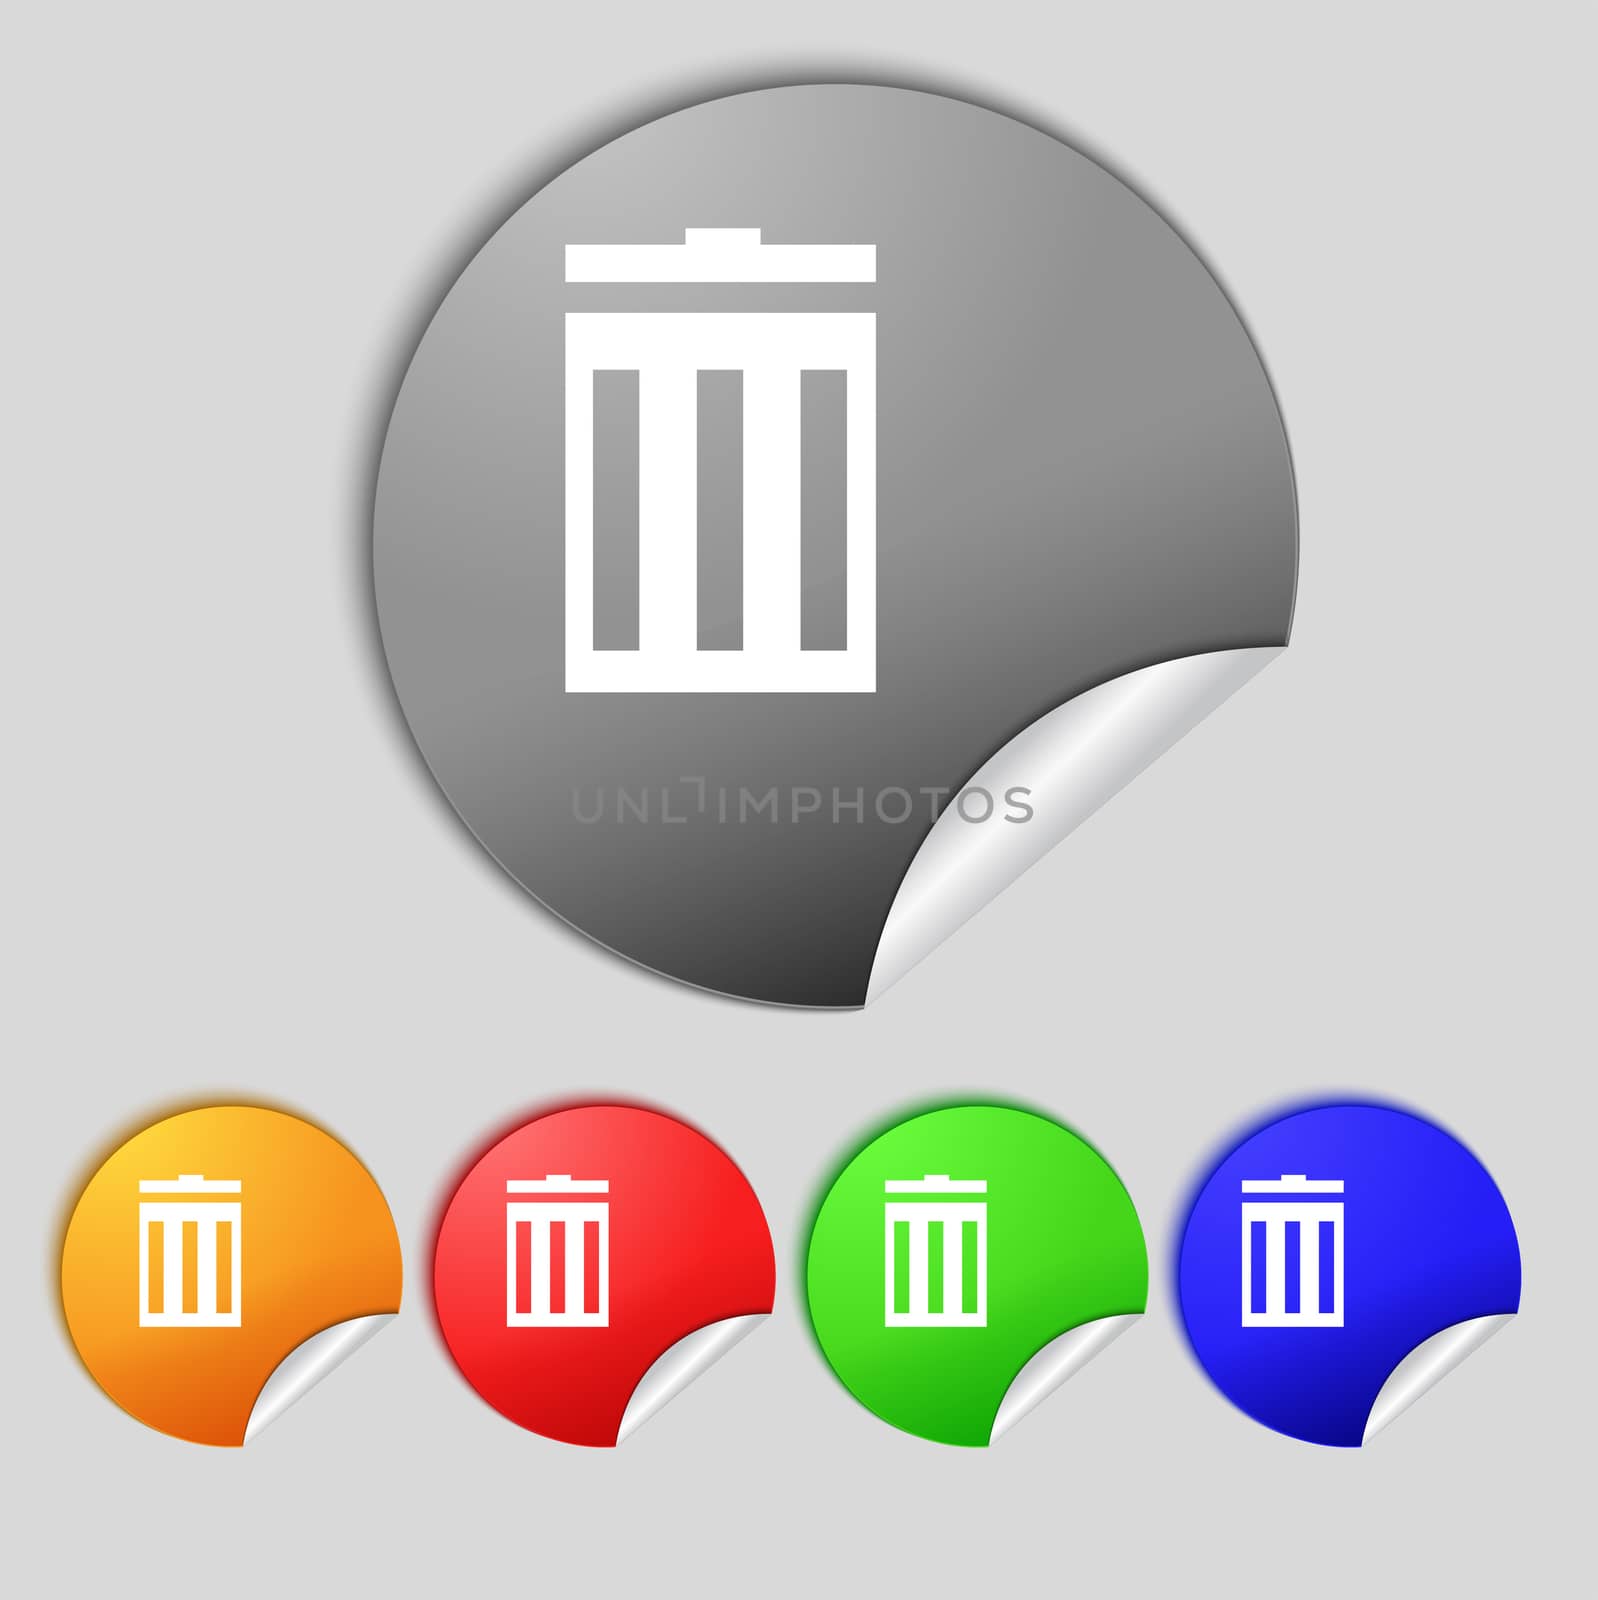 Recycle bin sign icon. Symbol. Set of colored buttons. illustration